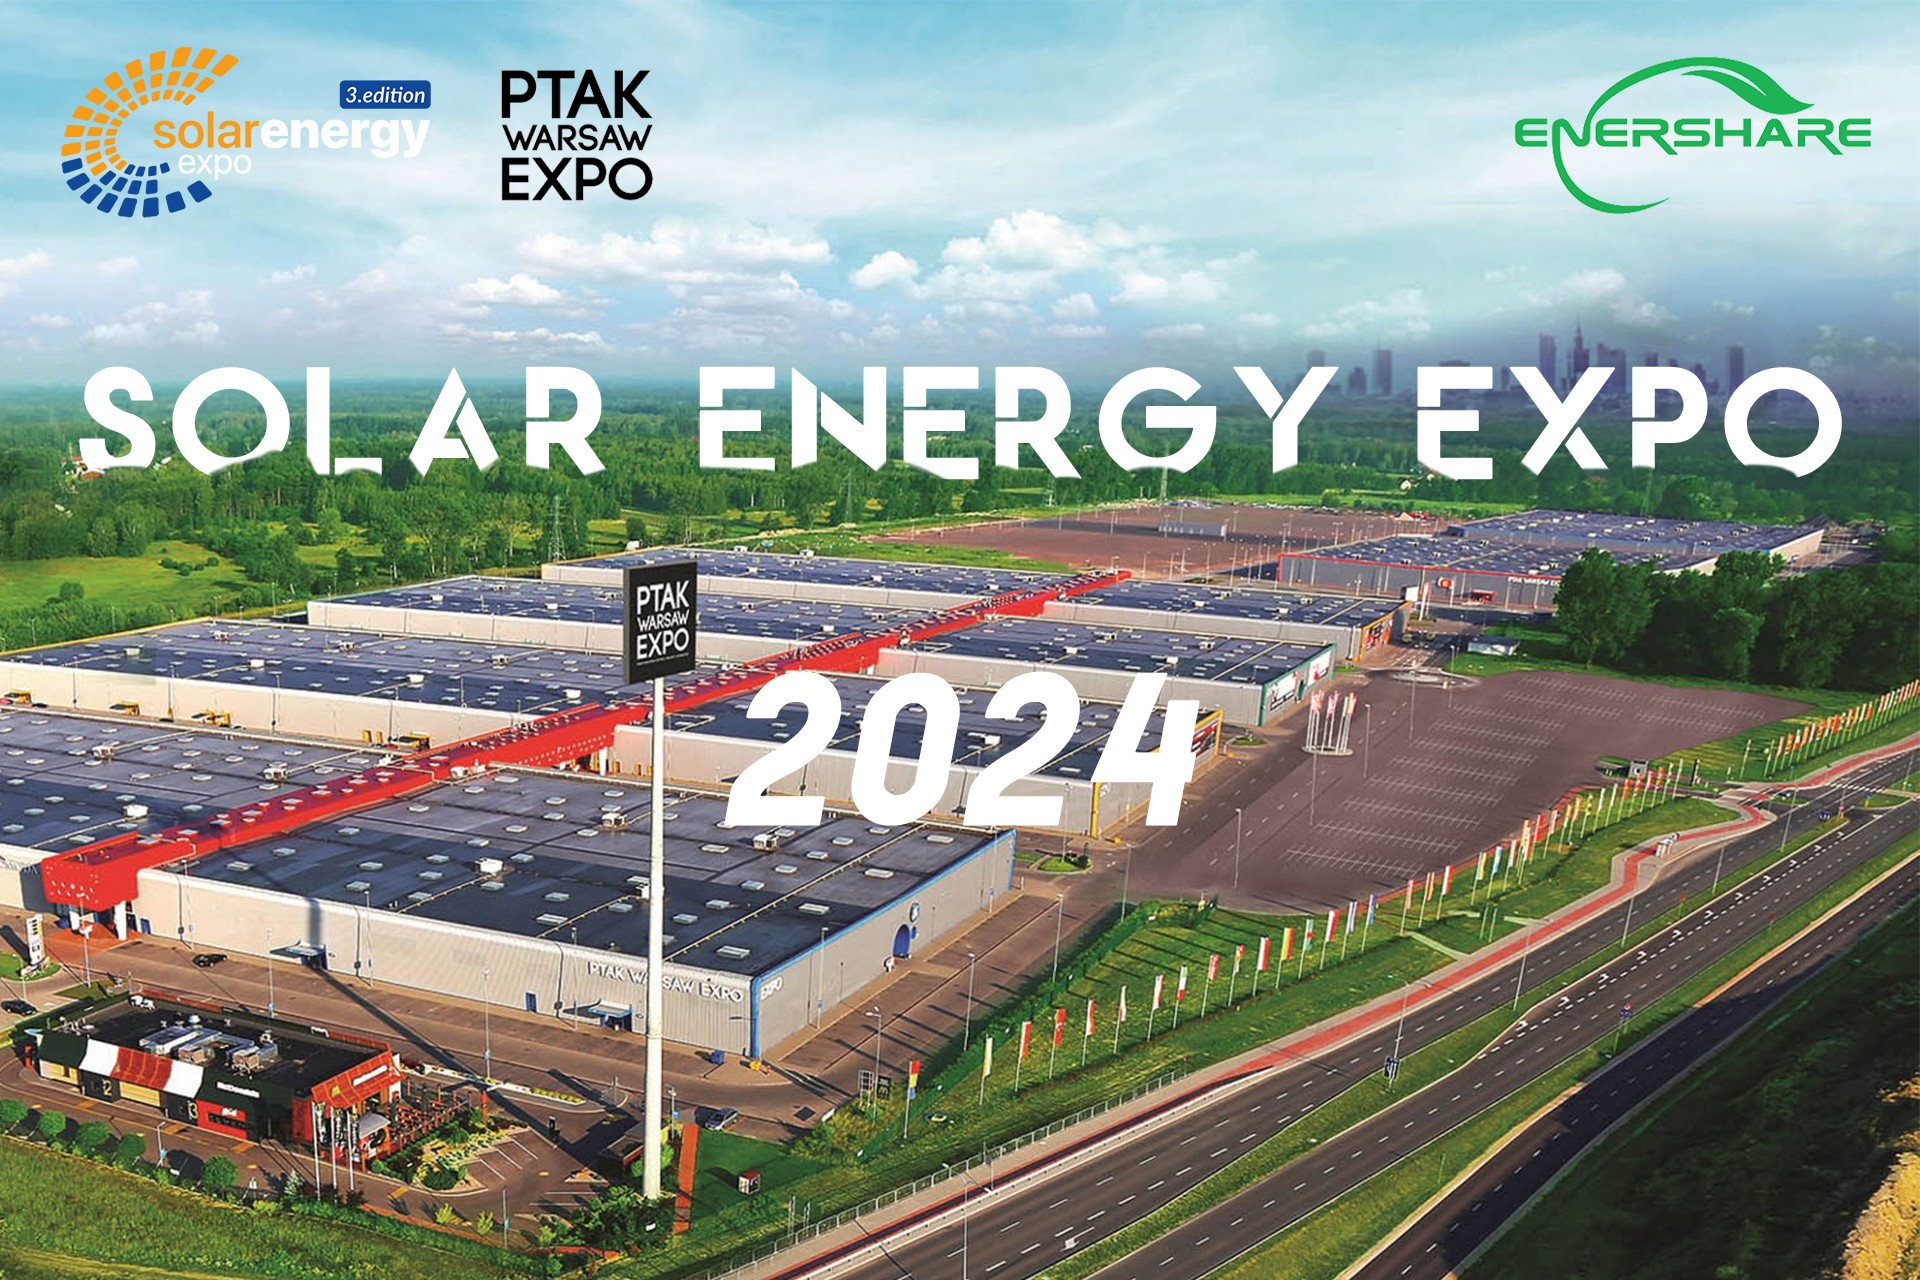 Enershare will participate in Solar Energy EXPO 2024 at Poland！